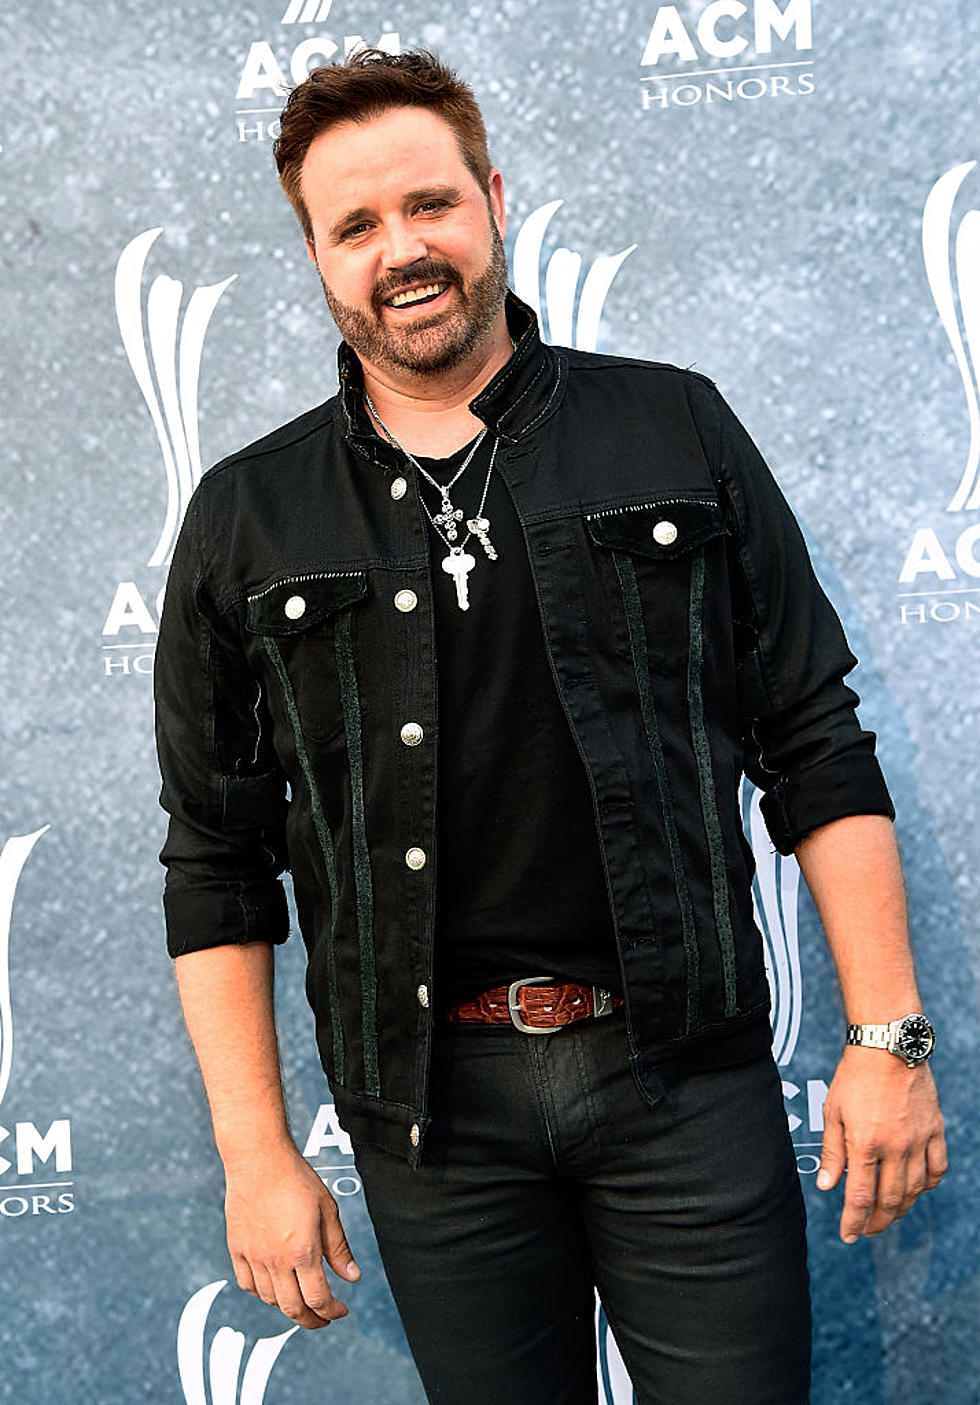 Album Review: Fired Up by Randy Houser